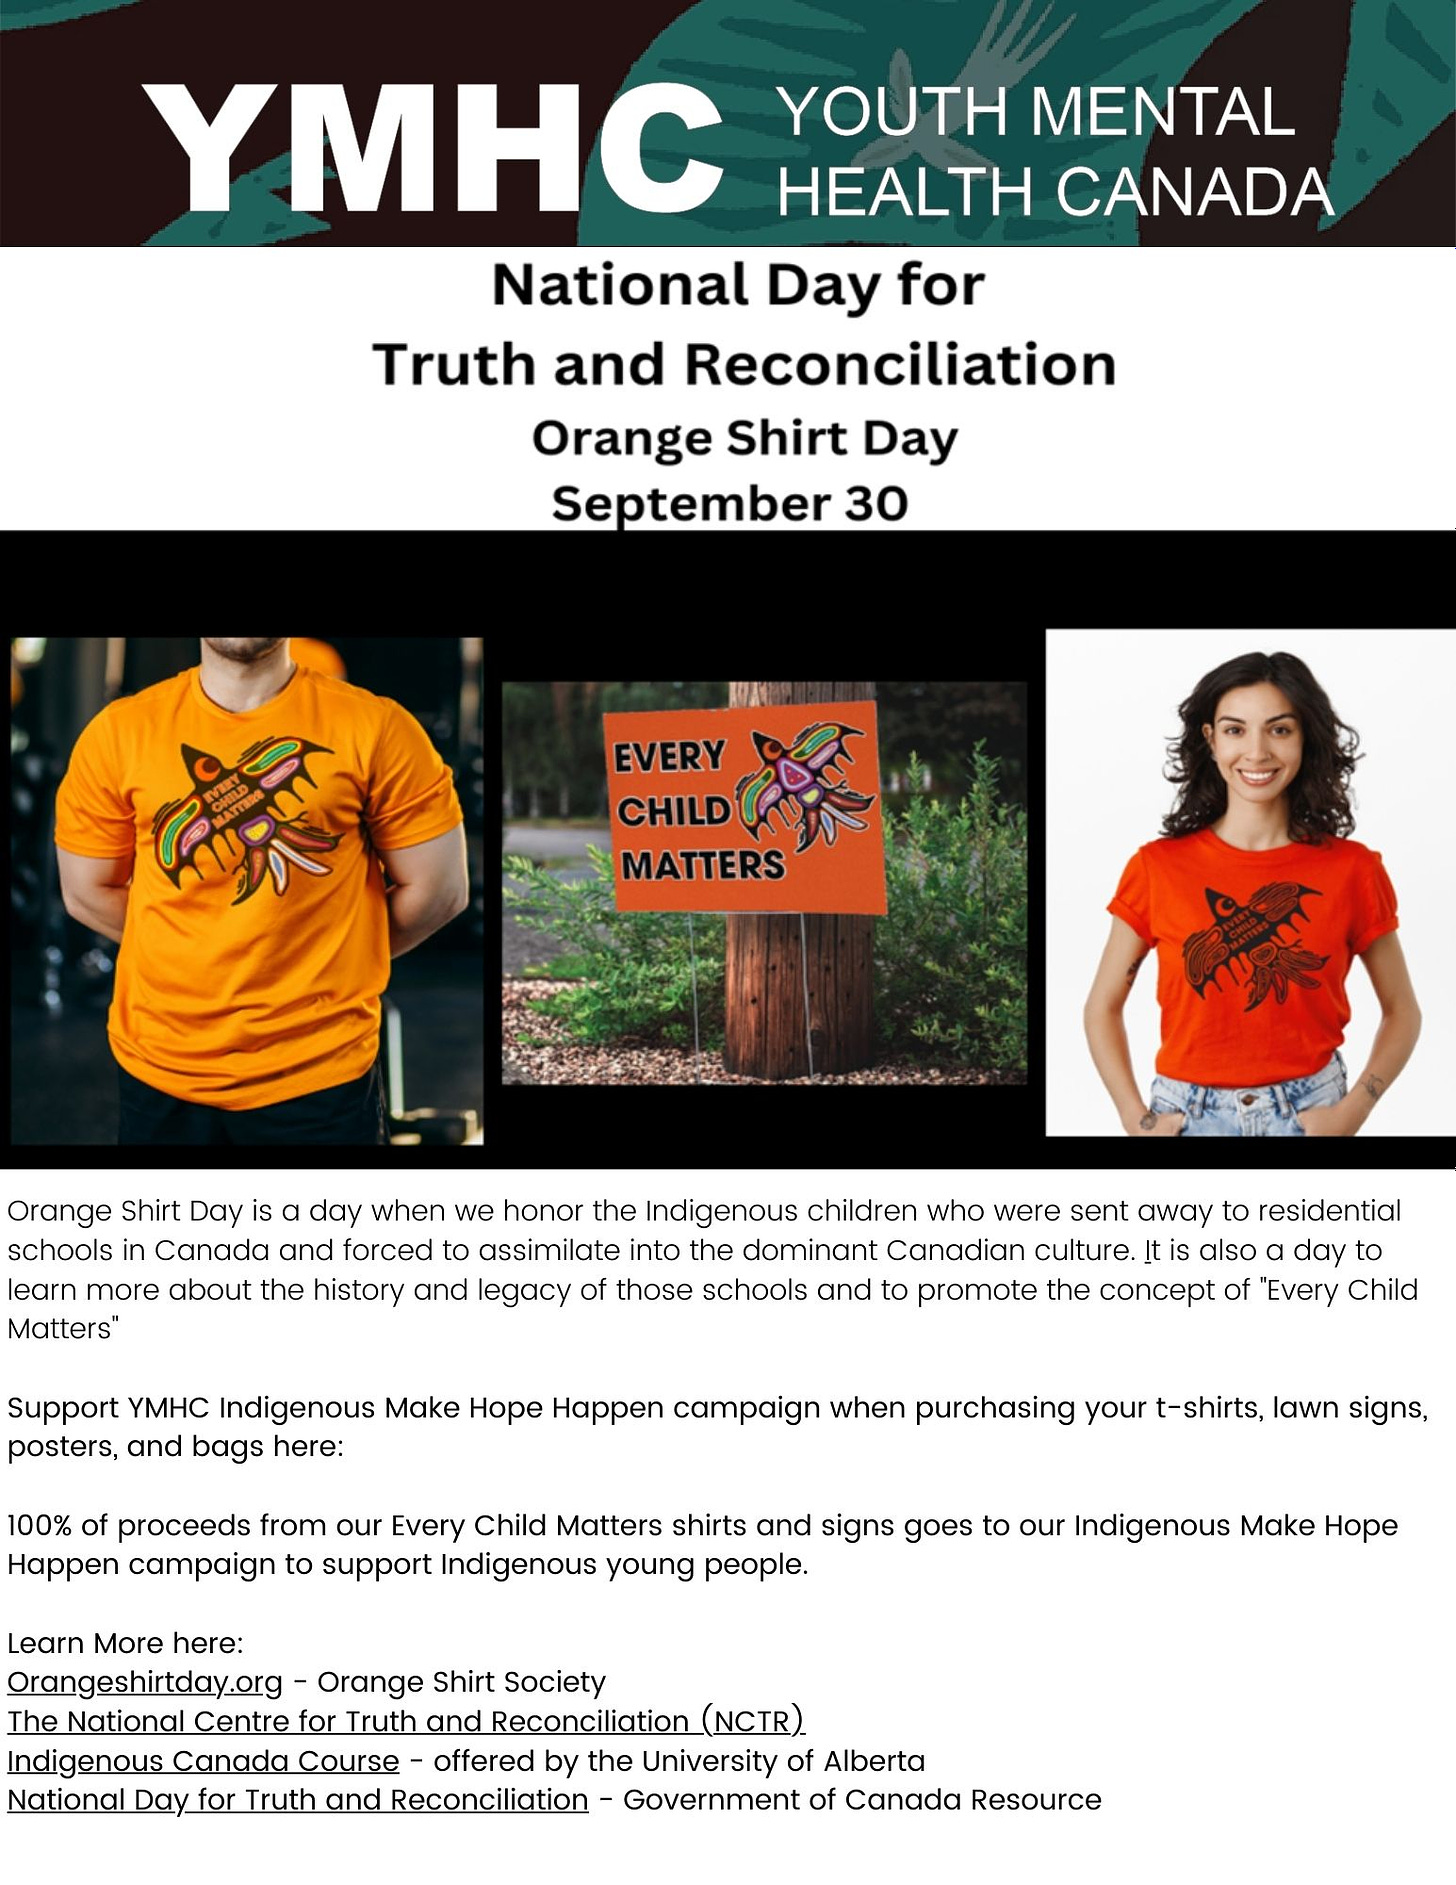 Orange Shirt Day is a day when we honor the Indigenous children who were sent away to residential schools in Canada and forced to assimilate into the dominant Canadian culture. |t is also a day to learn more about the history and legacy of those schools and to promote the concept of "Every Child Matters” Support YMHC Indigenous Make Hope Happen campaign when purchasing your t-shirts, lawn signs, posters, and bags here: 100% of proceeds from our Every Child Matters shirts and signs goes to our Indigenous Make Hope Happen campaign to support Indigenous young people. Learn More here: Orangeshirtday.org - Orange Shirt Society The National Centre for Truth and Reconciliation (NCTR). Indigenous Canada Course - offered by the University of Alberta National Day for Truth and Reconciliation - Government of Canada Resource 